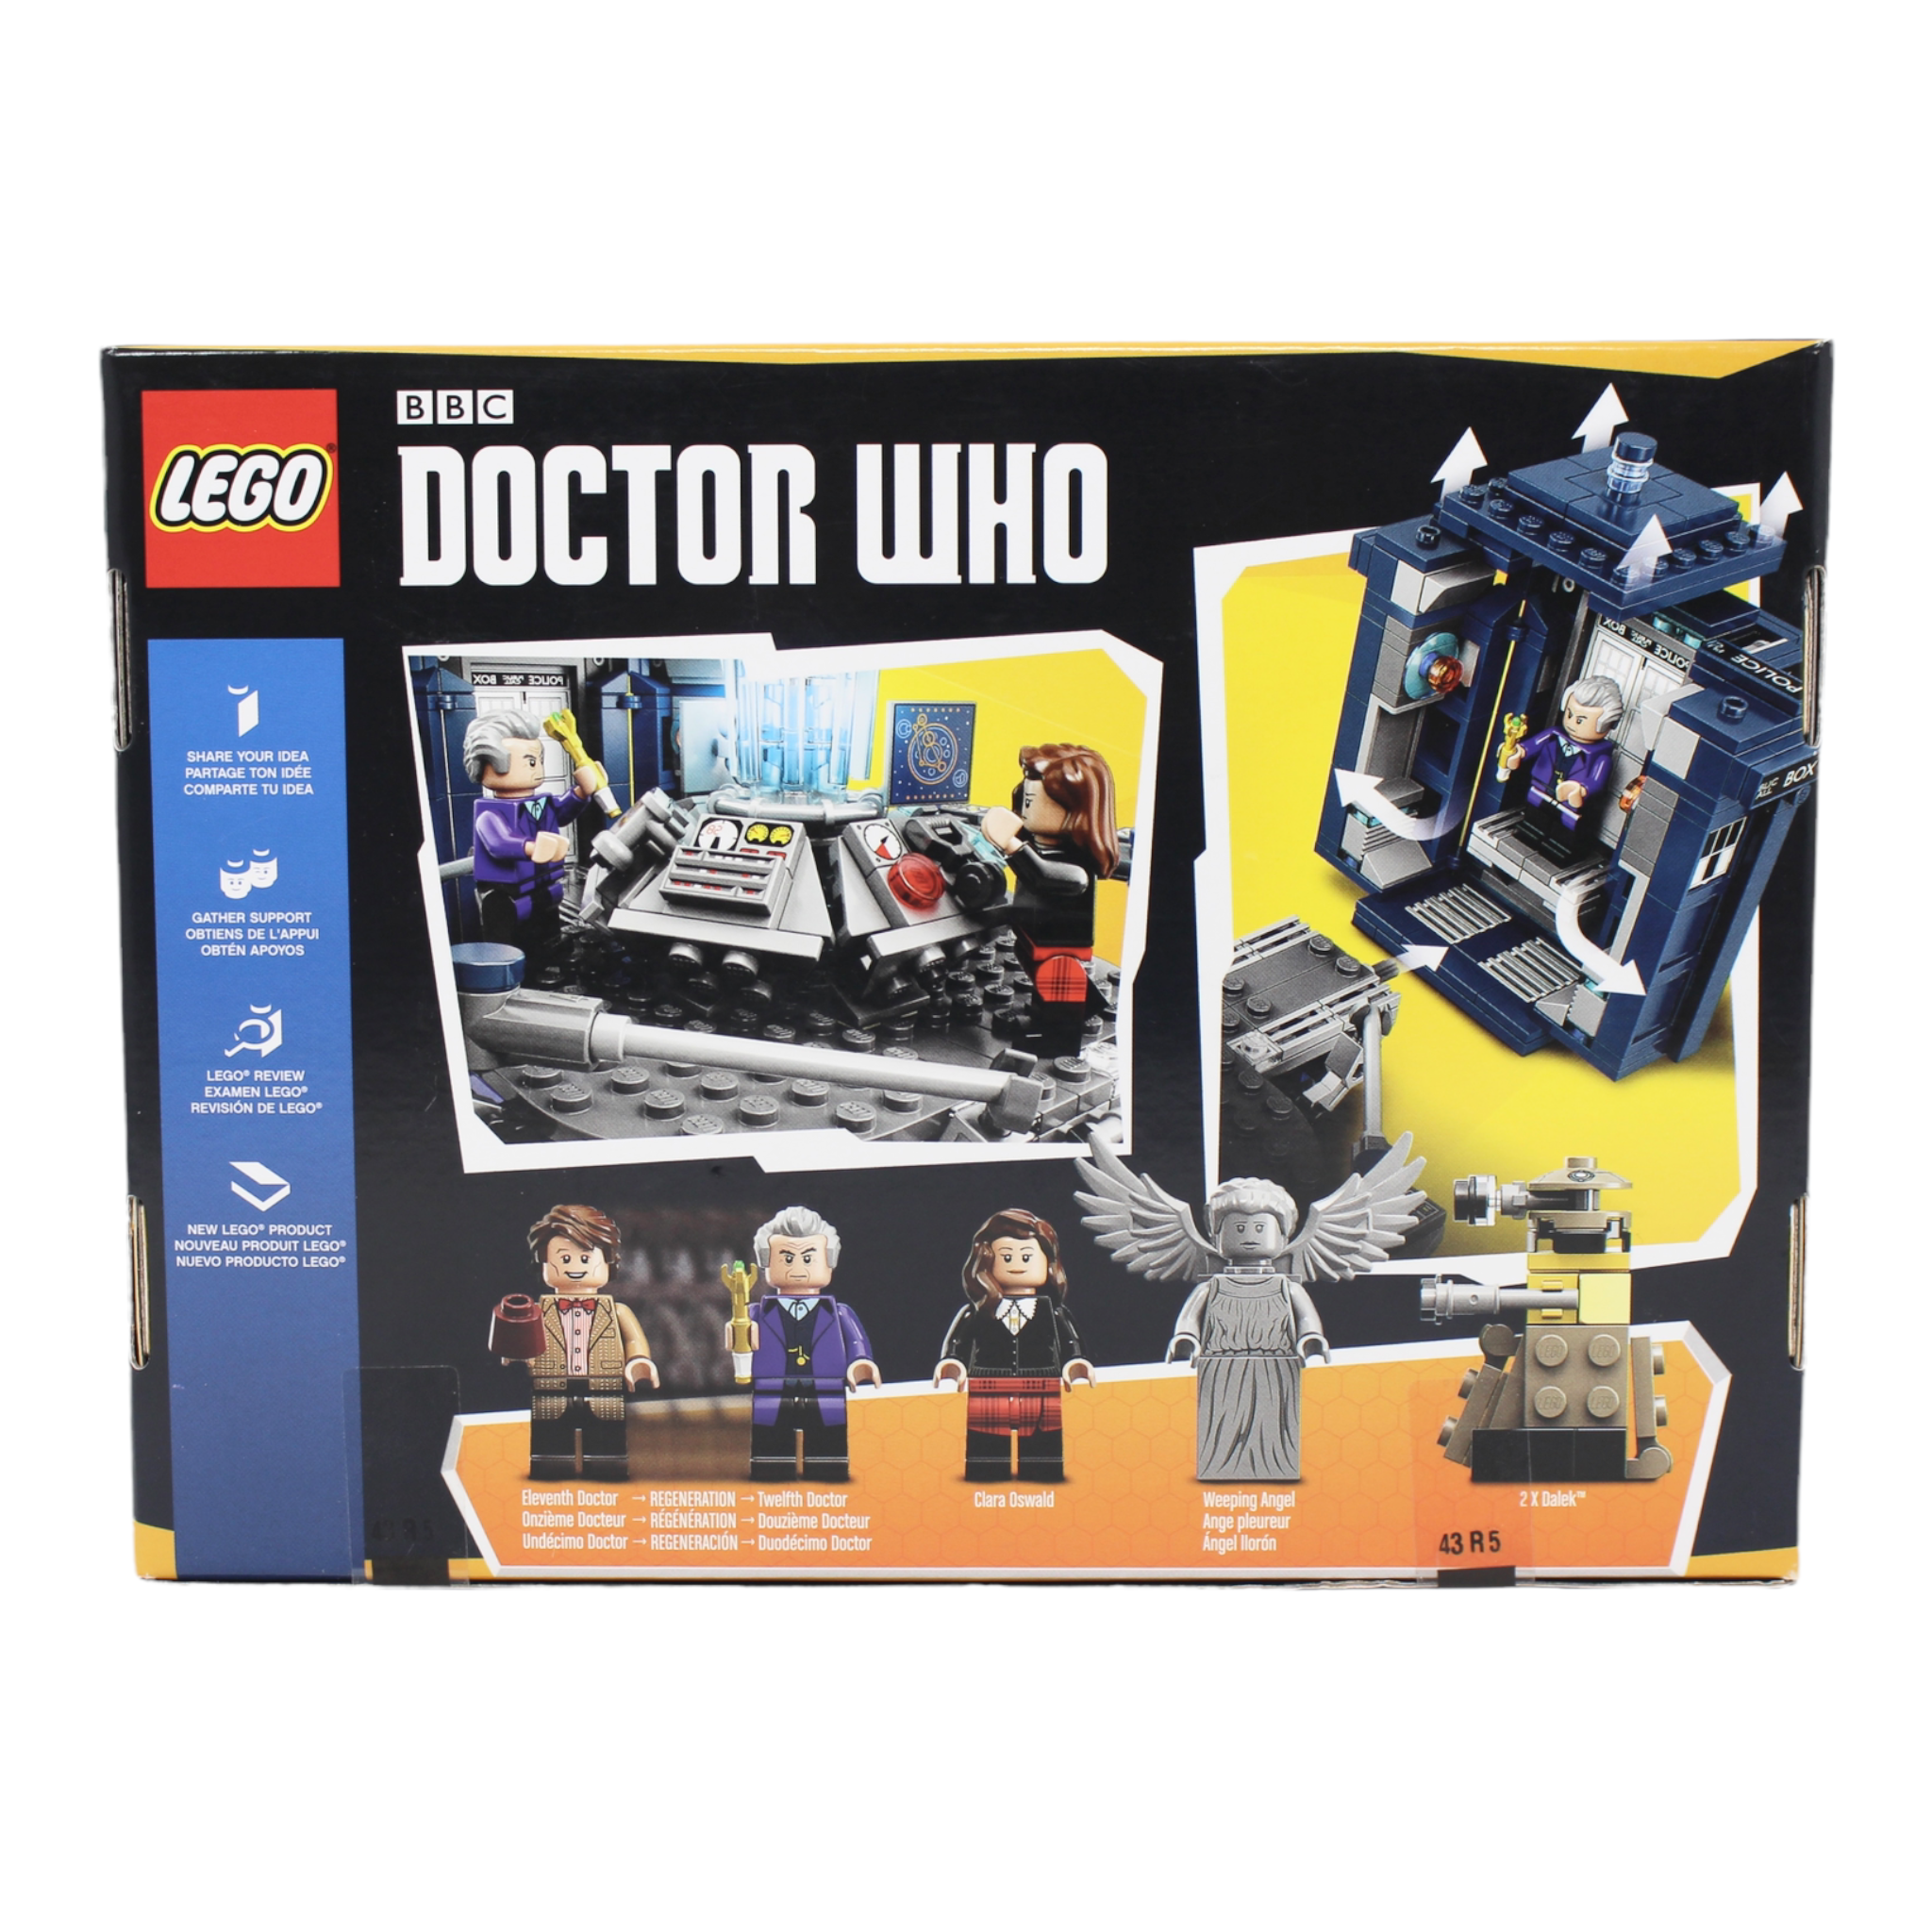 Retired Set 21304 LEGO Ideas Doctor Who